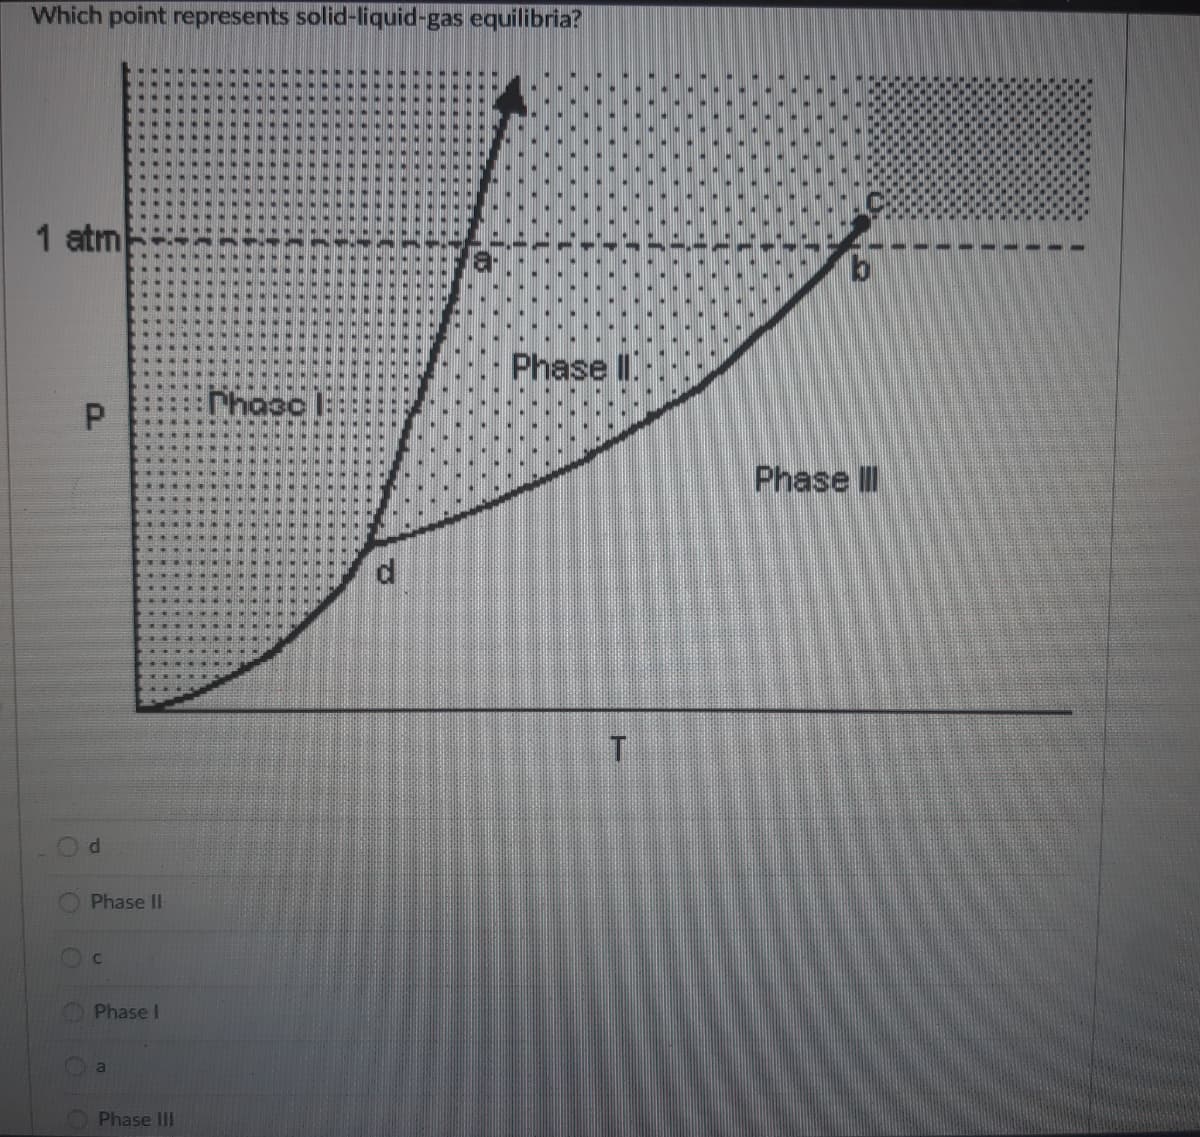 Which point represents solid-liquid-gas equilibria?
1 atm
..
....
M ... ...
...
Phase
Phaoc
P.
.. ...
.. ....
.... ......
Phase
*. ----
ww .... ....
... .... -
P.
Phase II
Cc
Phase I
a
Phase III
